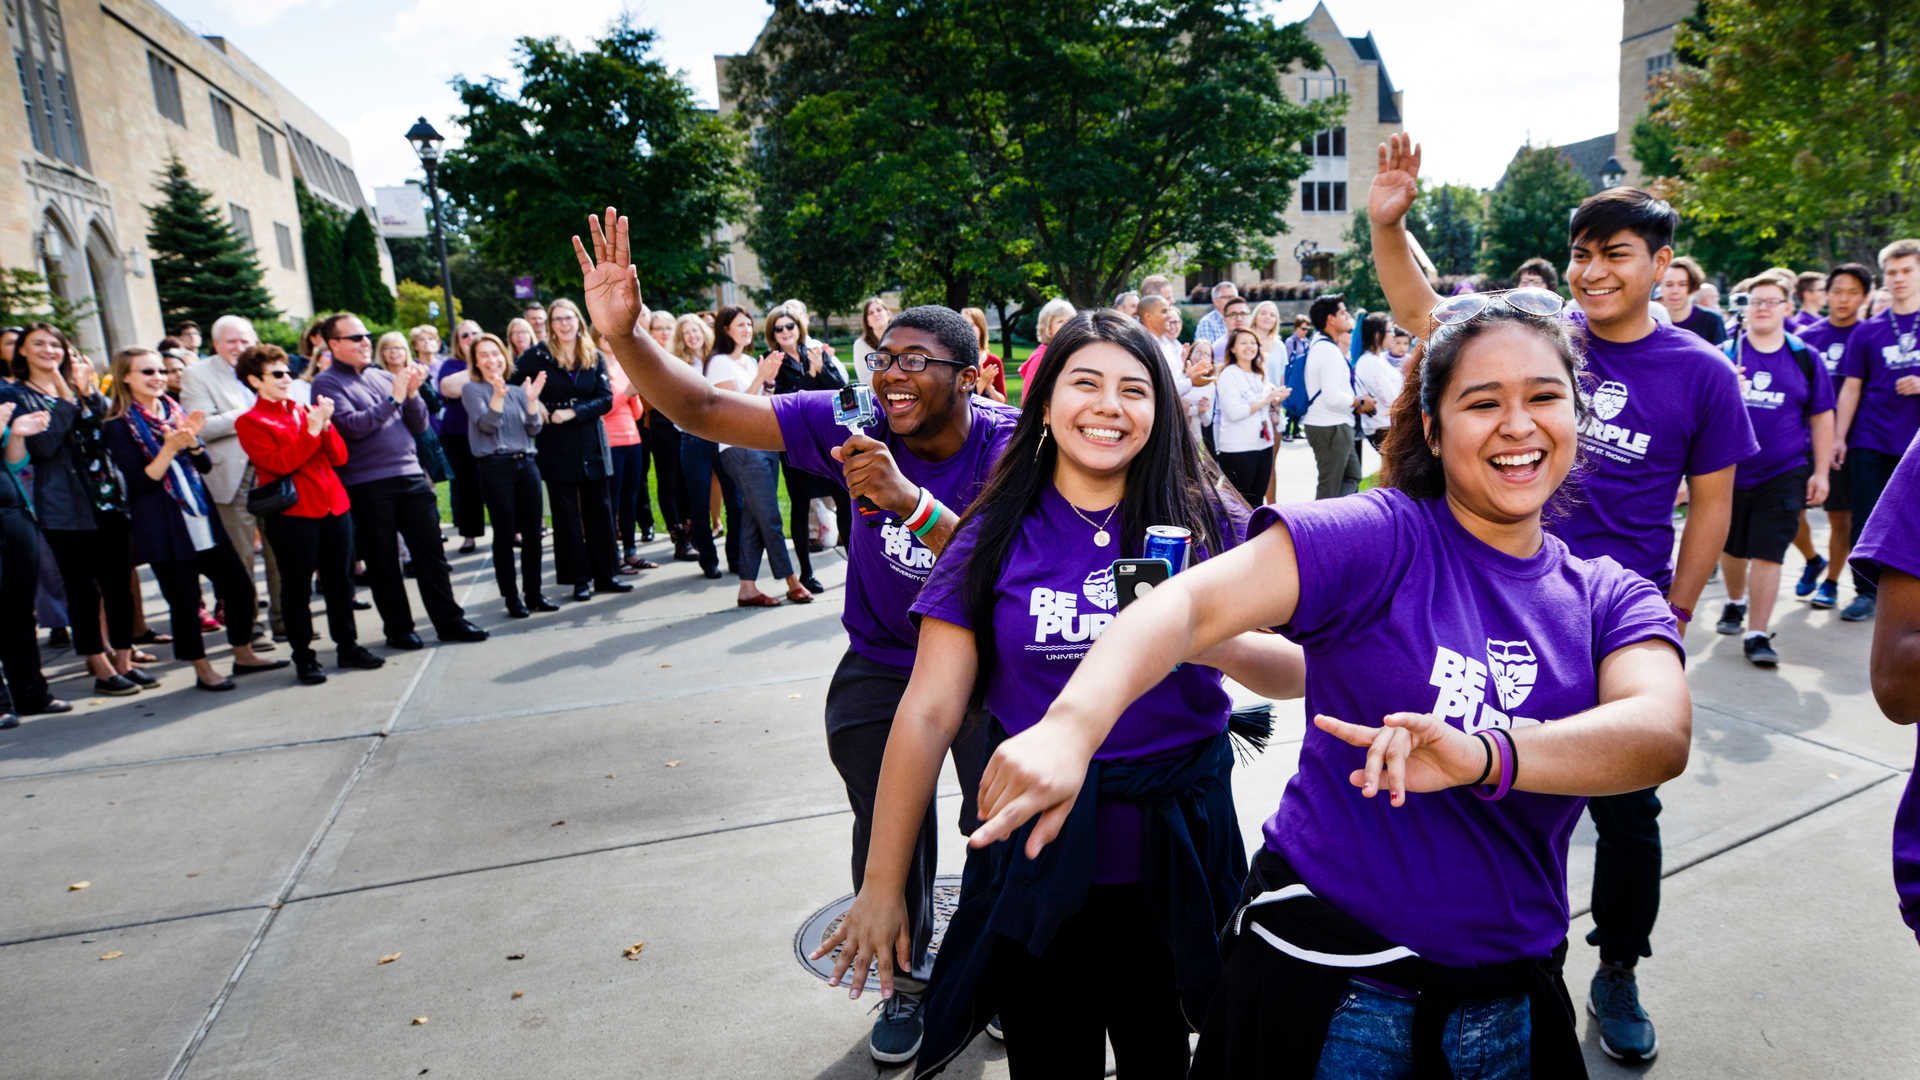 Students wearing "Proud to be Purple" shirts during march through arches